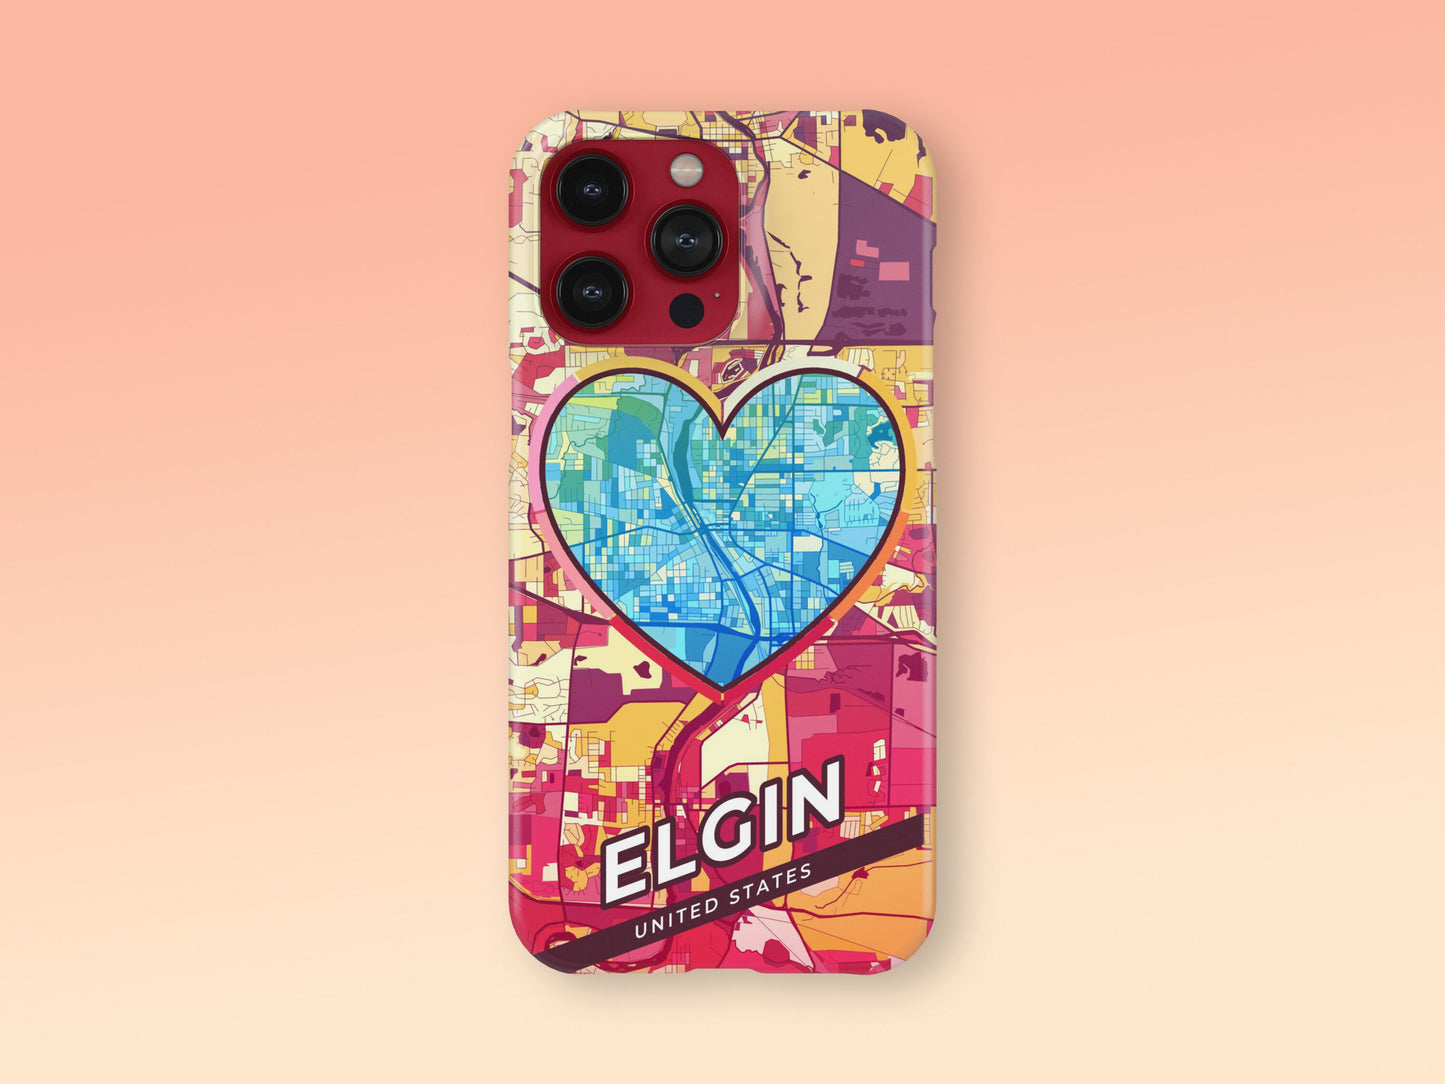 Elgin Illinois slim phone case with colorful icon. Birthday, wedding or housewarming gift. Couple match cases. 2